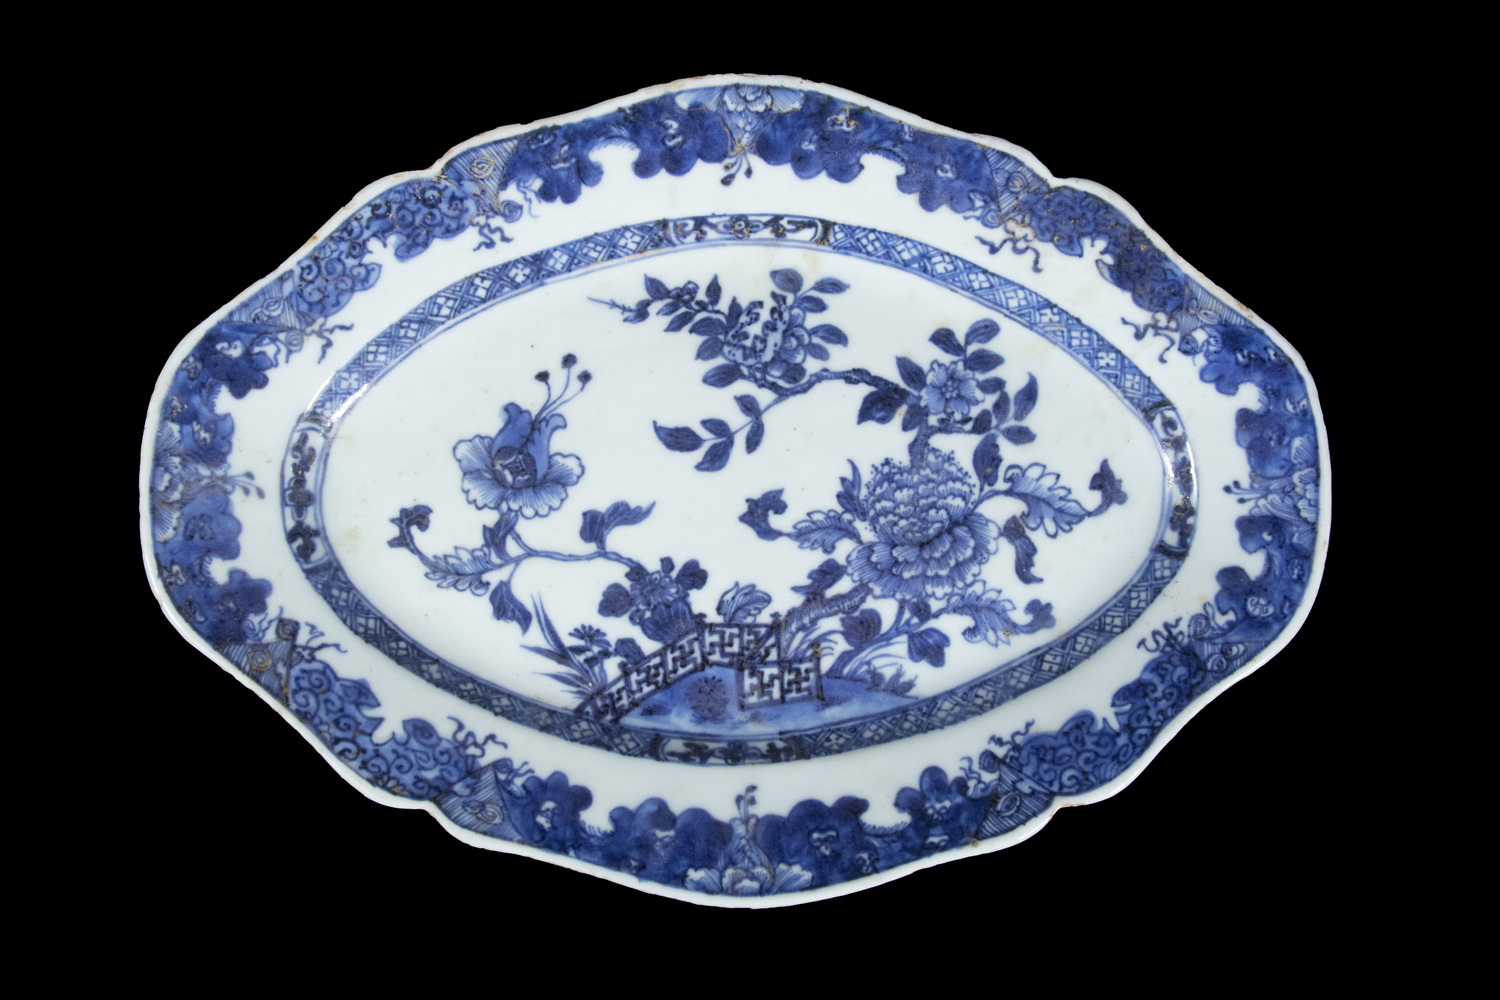 CHINESE EXPORT PORCELAIN OVAL PLATE 2d676e